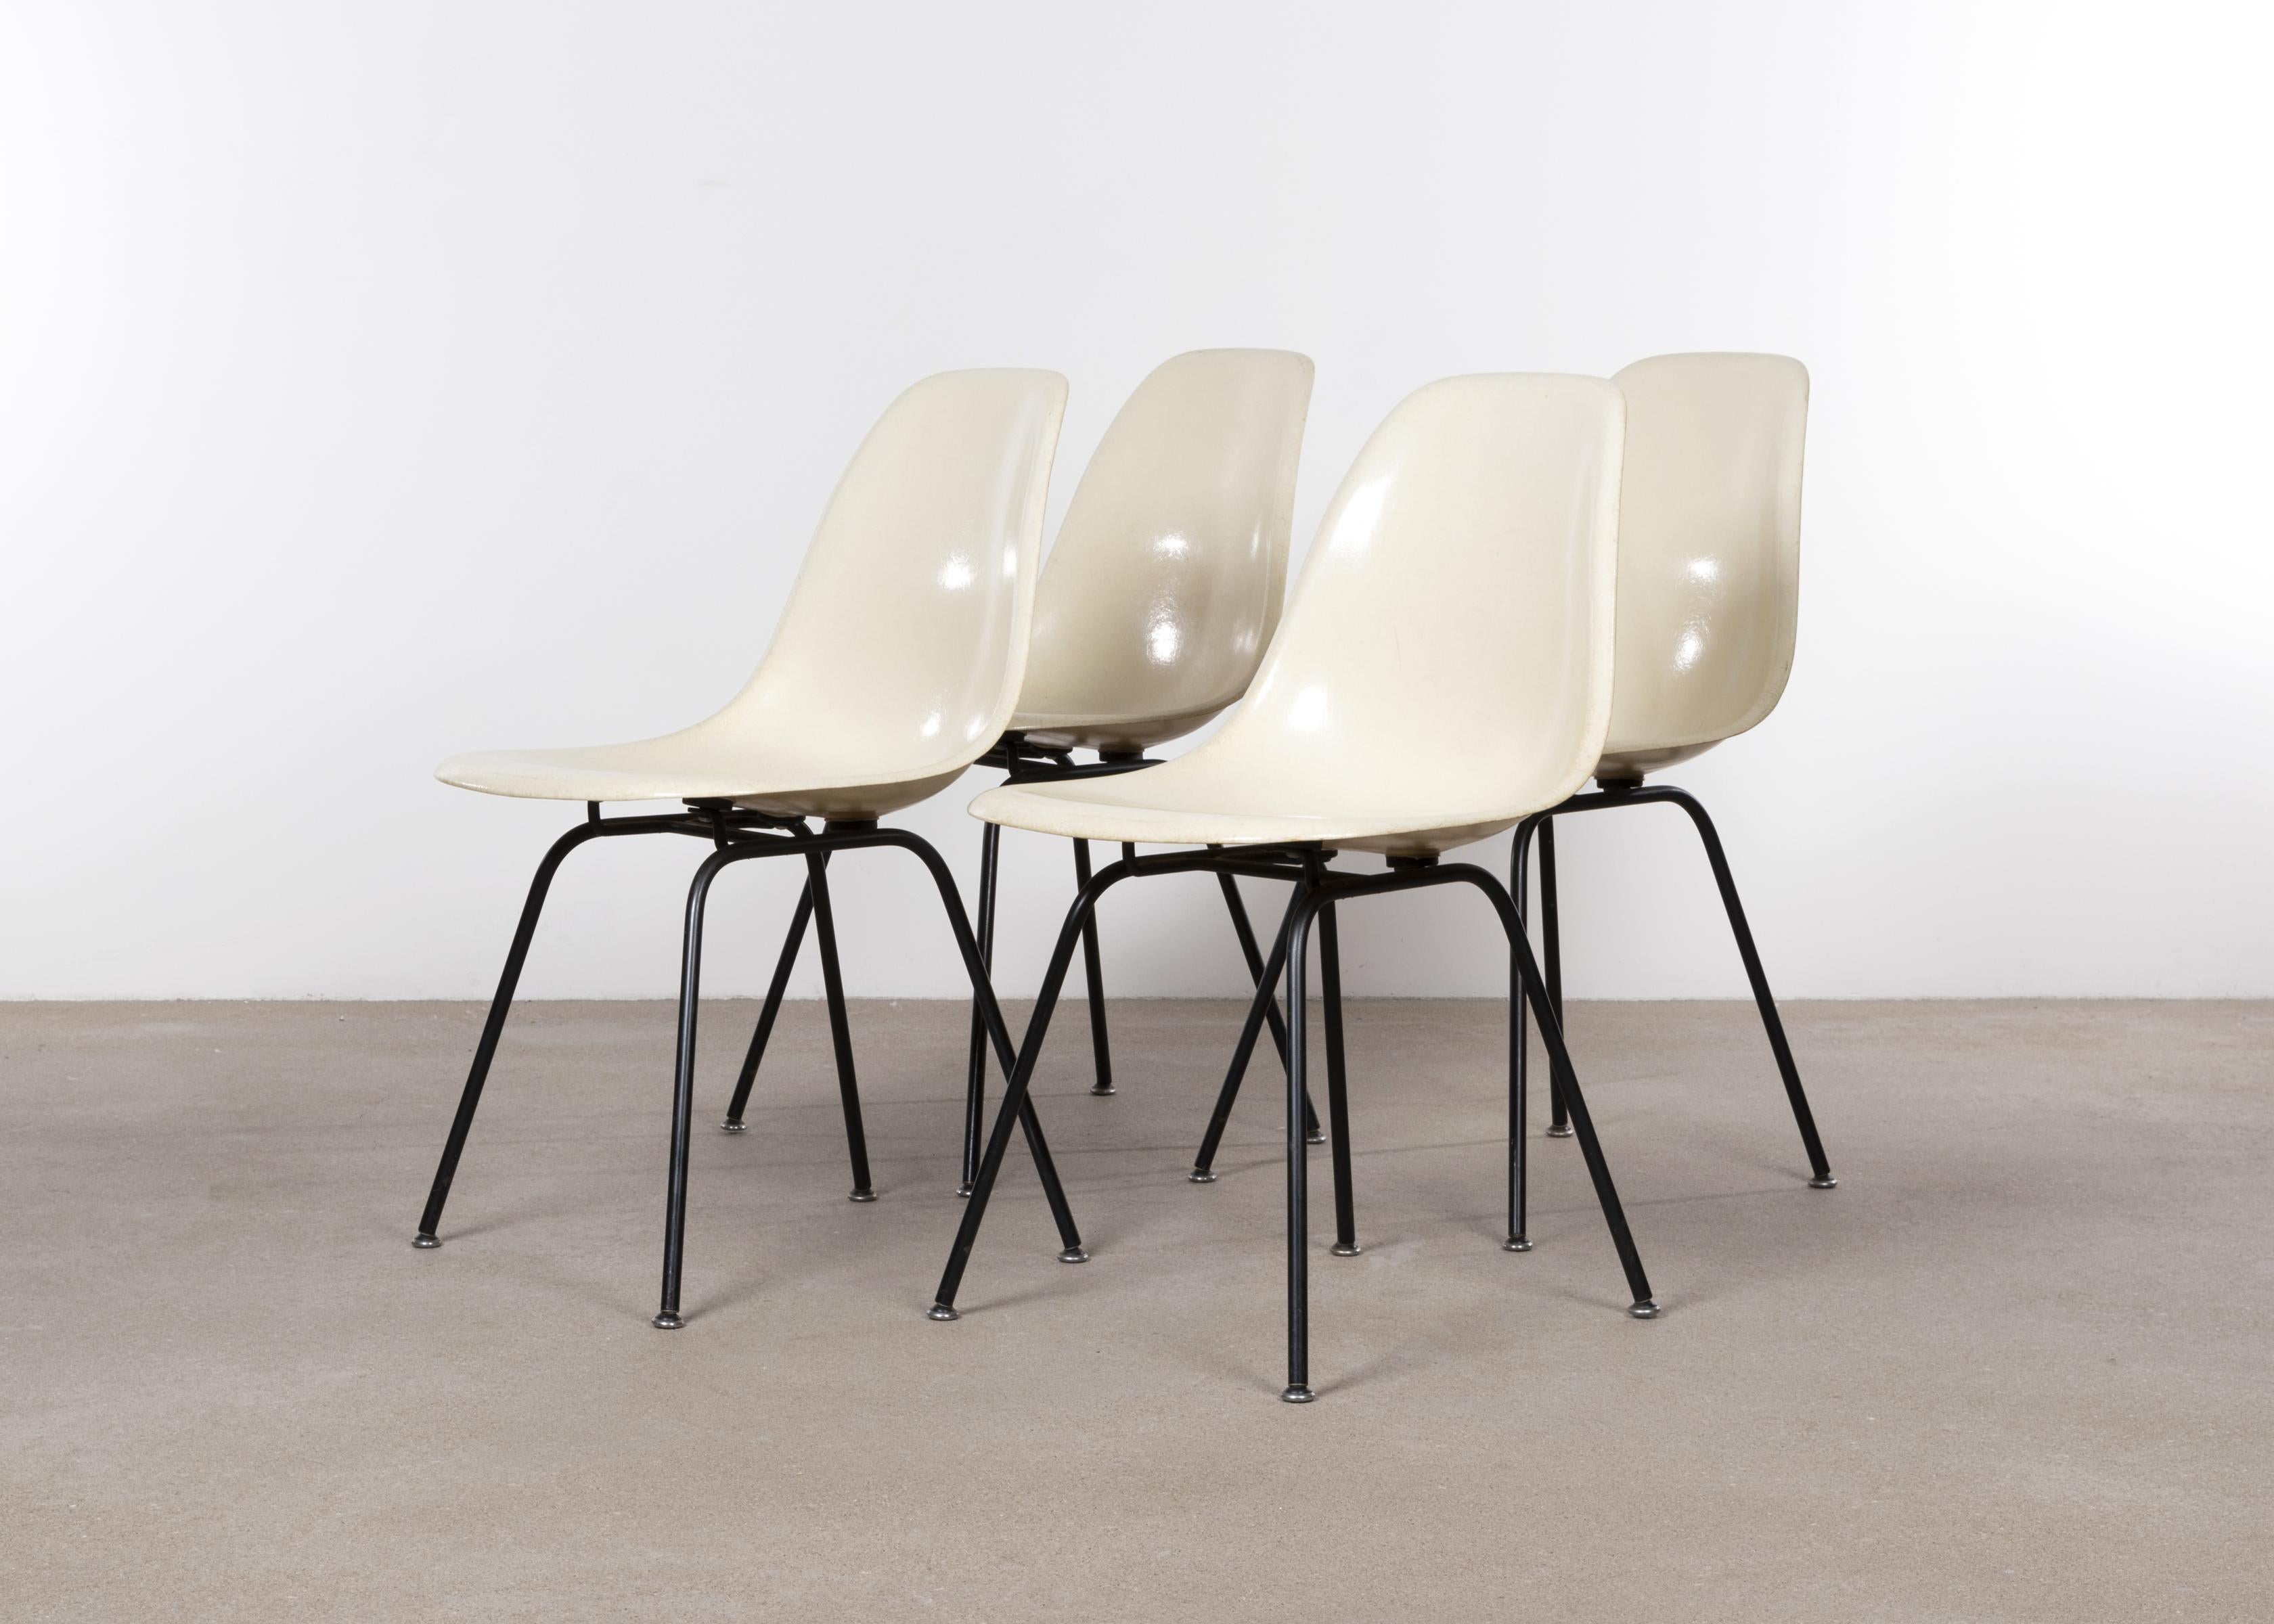 American Set of 4 Early Parchment Eames DSX Dining Chairs for Herman Miller